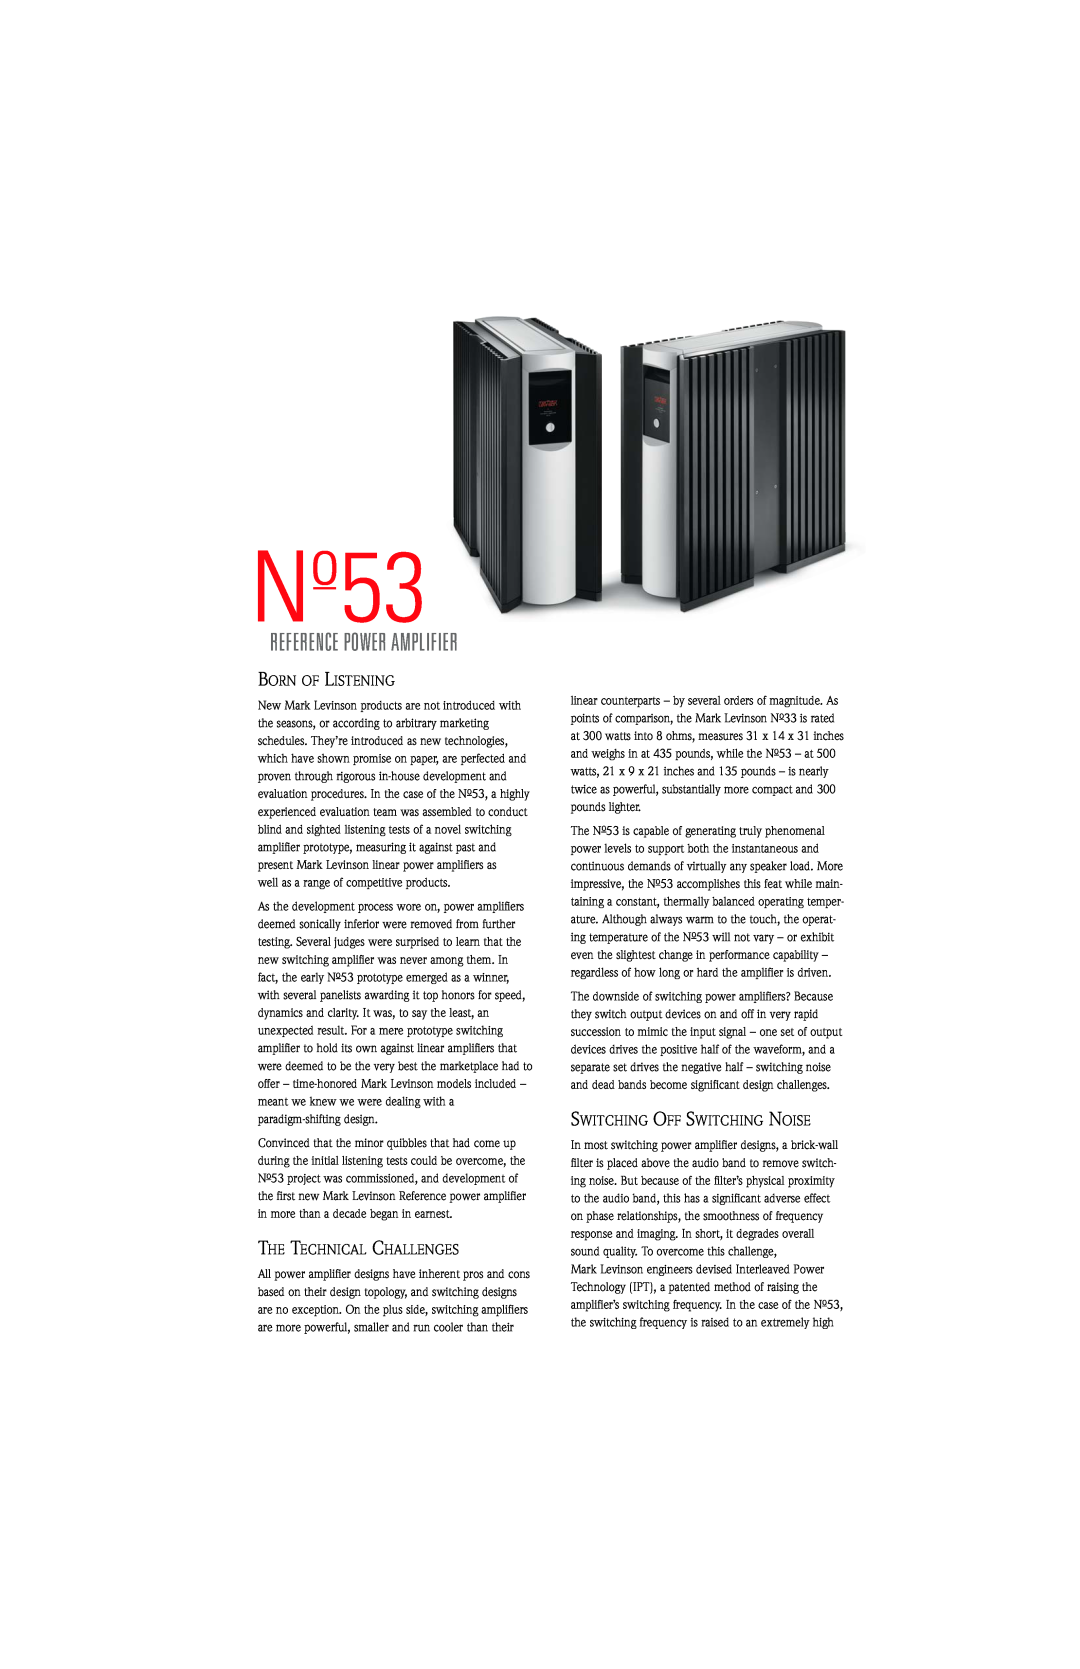 Mark Levinson No. 53 manual No53, Reference Power Amplifier, Born Of Listening, The Technical Challenges 